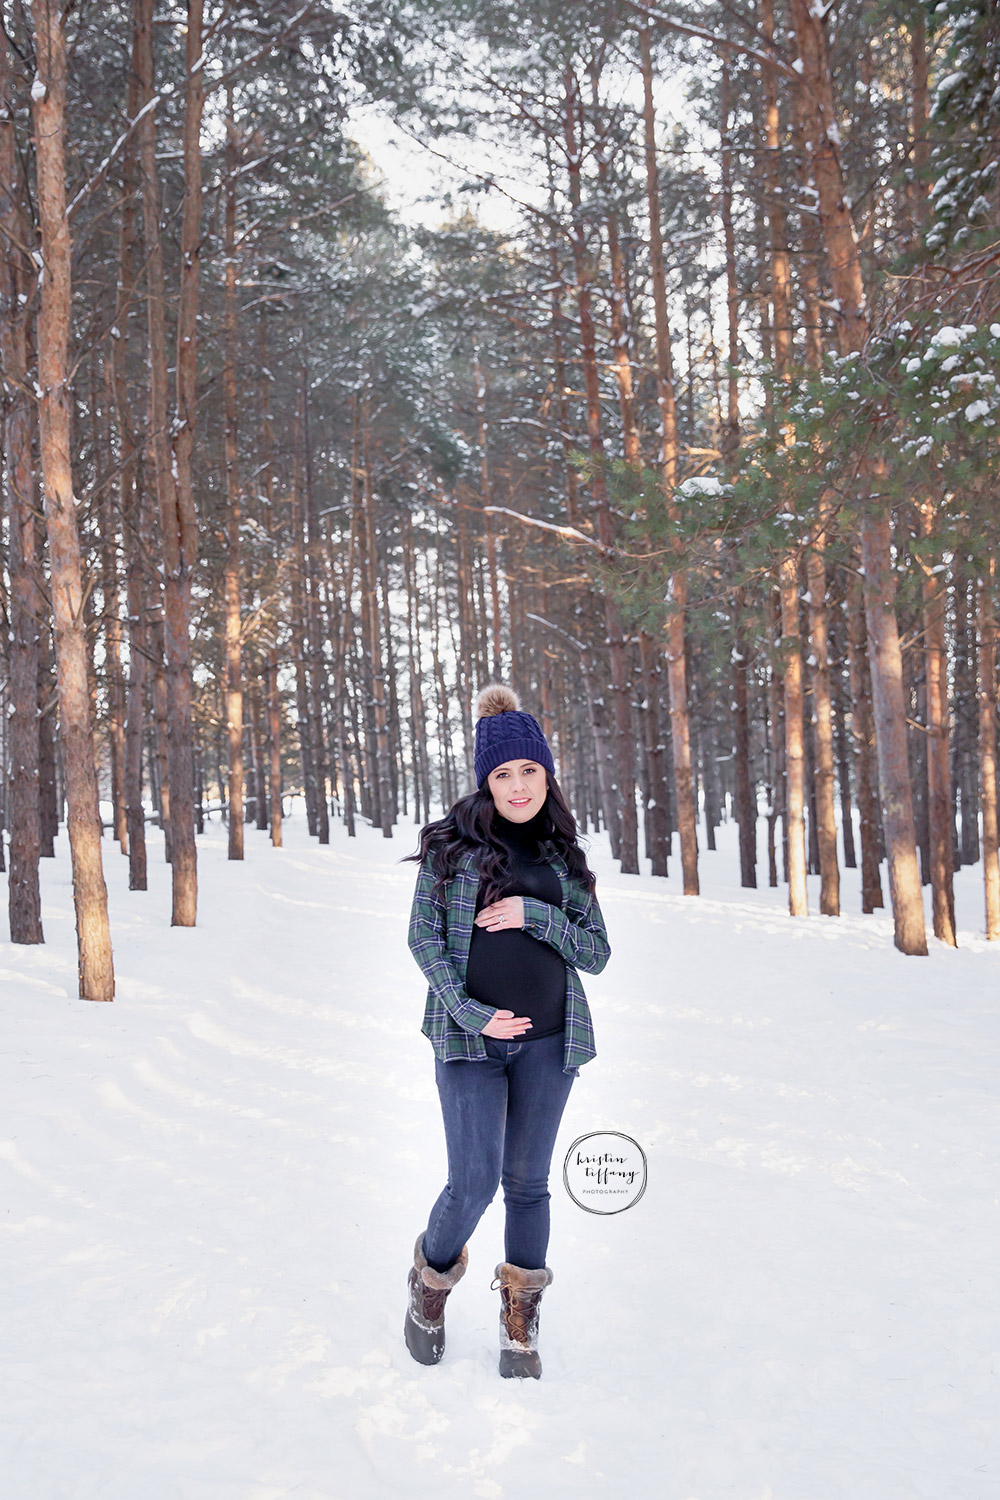 a maternity photo taken in the snowy woods